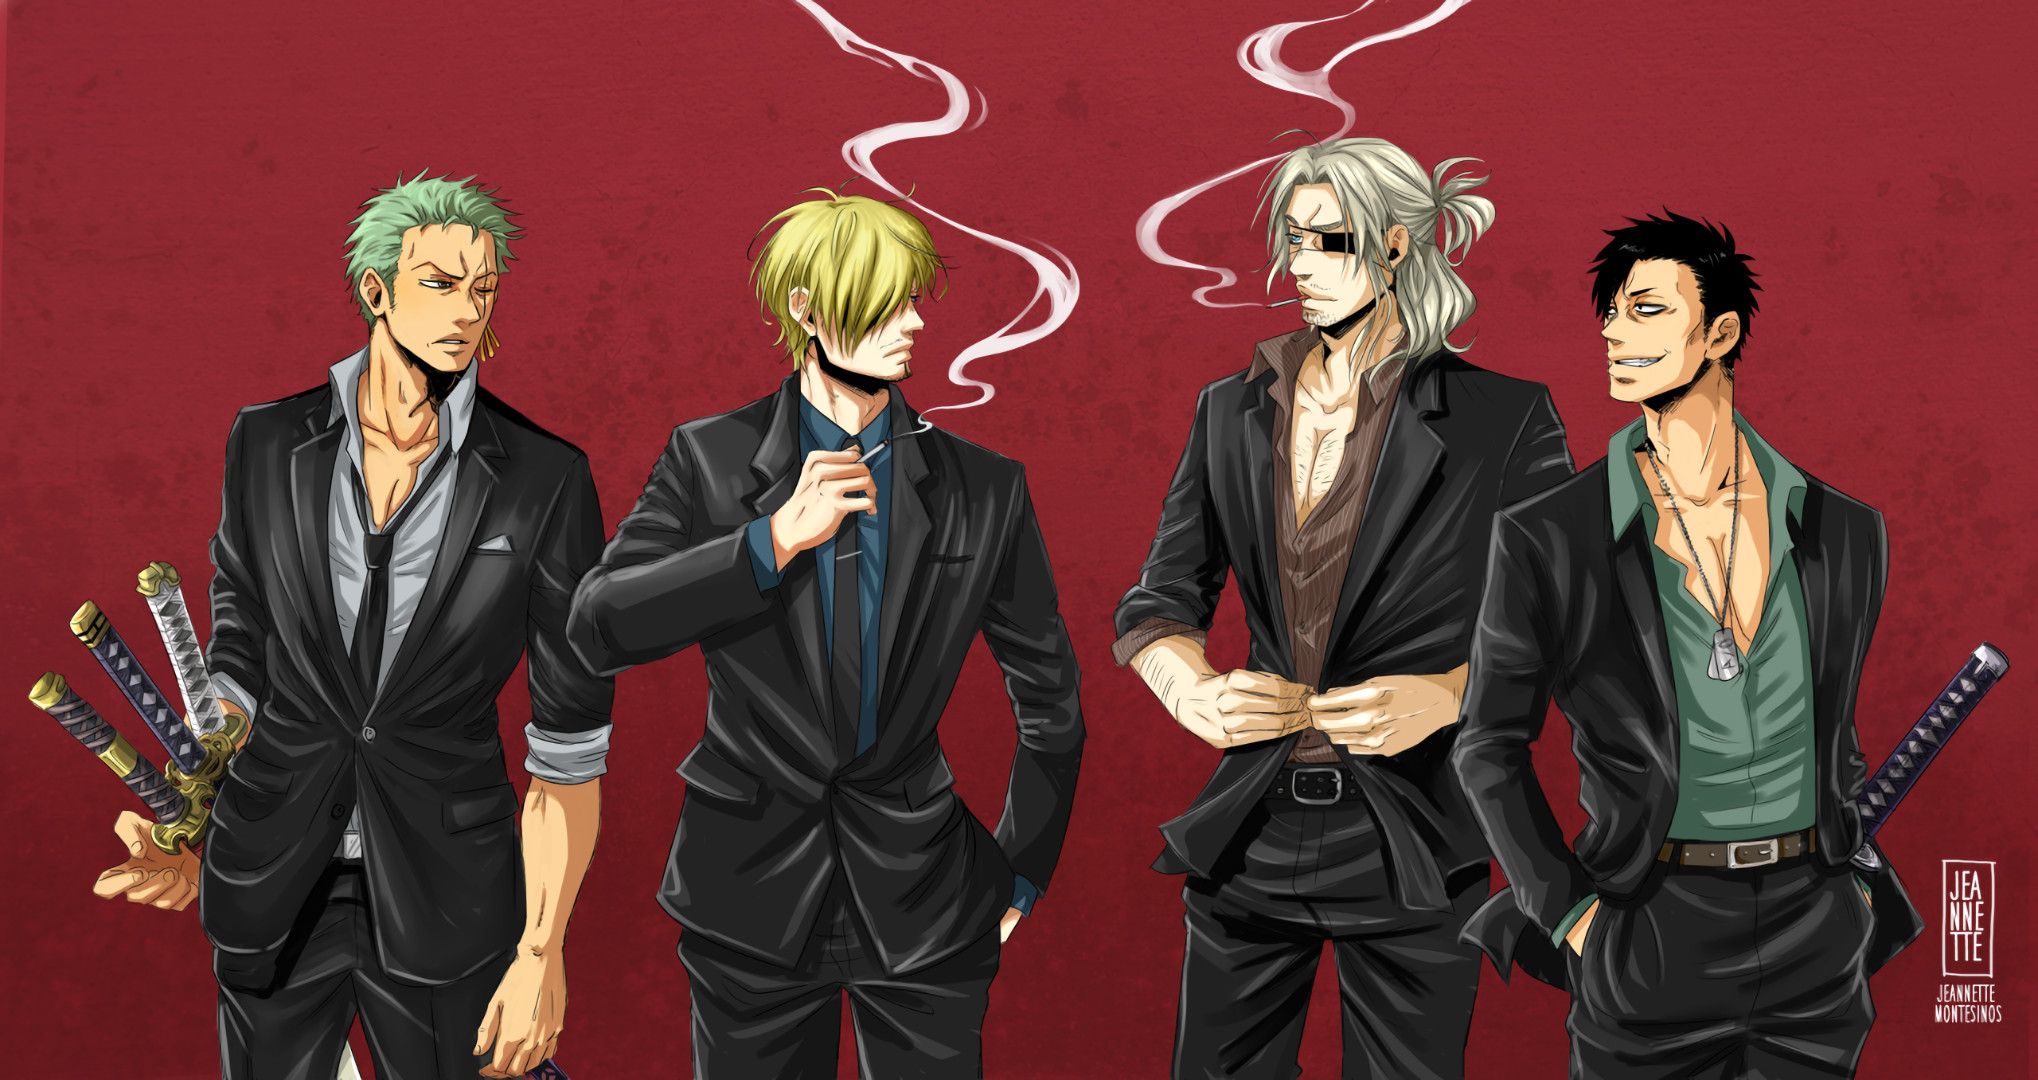 Anime Gangsters - Anime Gangsters updated their cover photo.